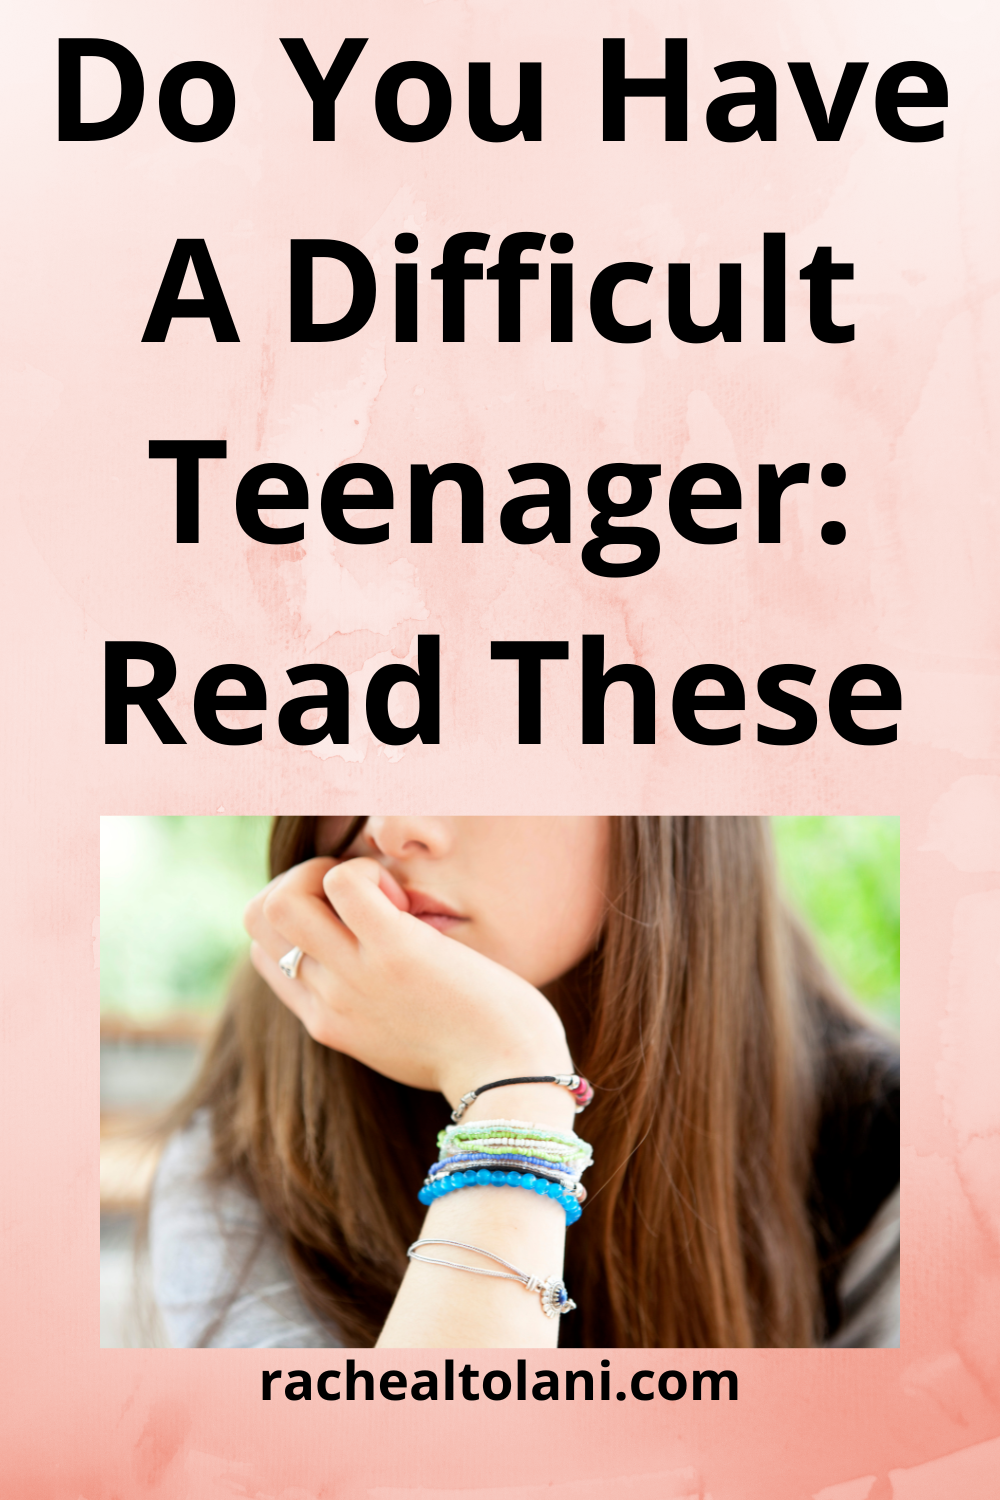 How To Handle A Difficult Teenager